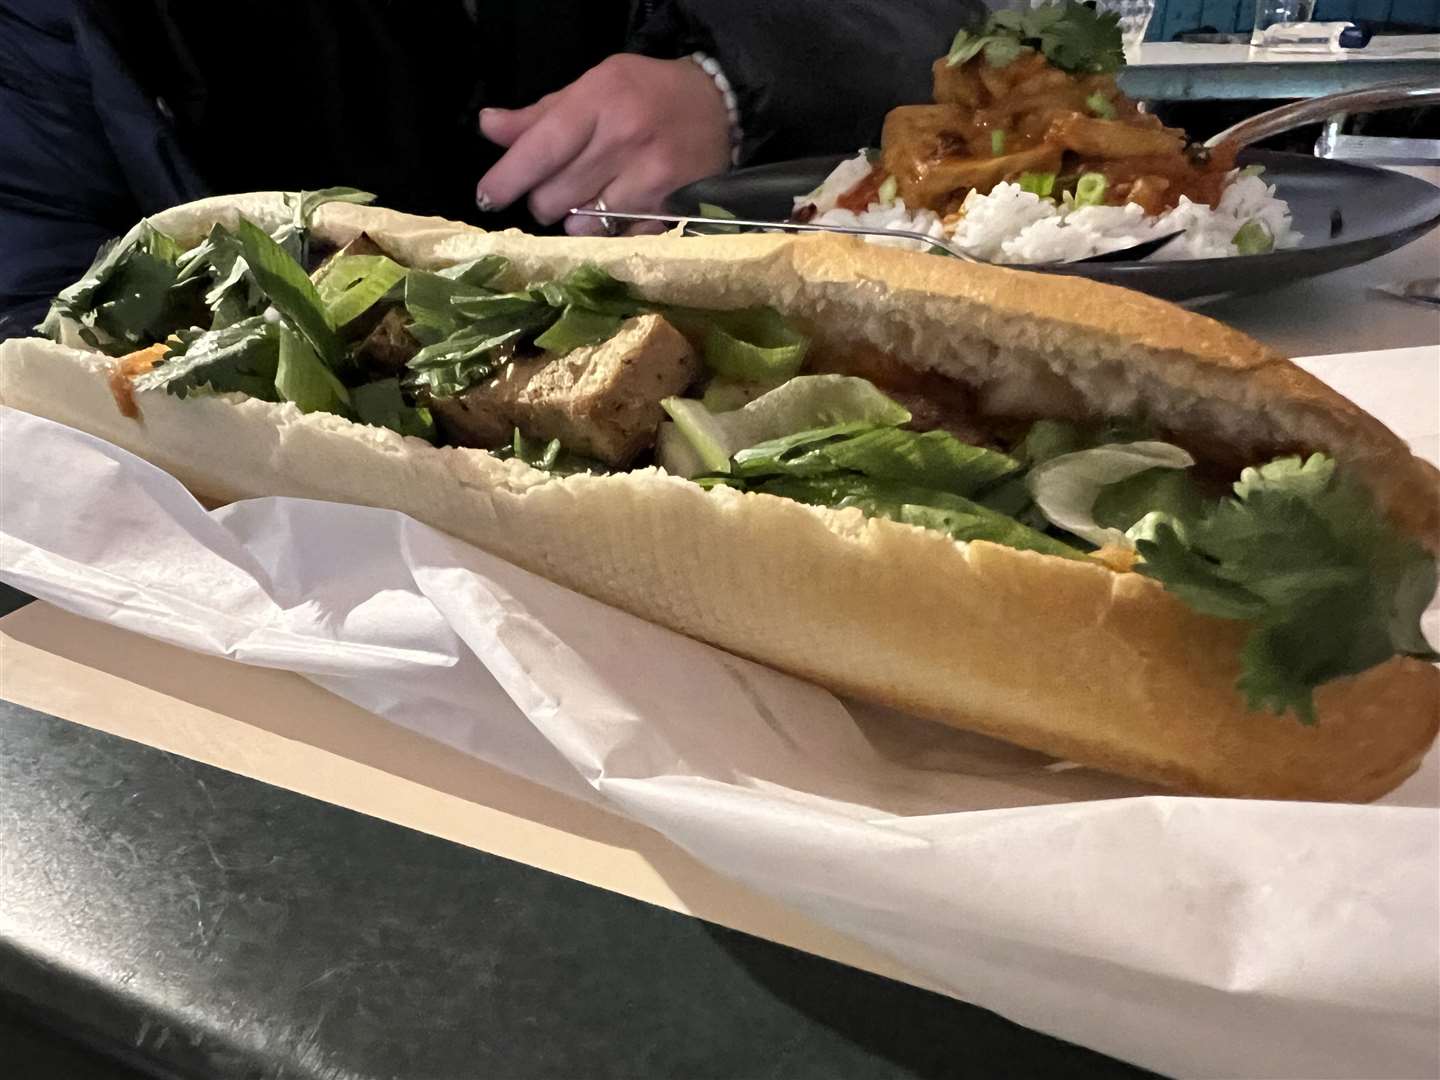 The banh mi - a sandwich you need to experience